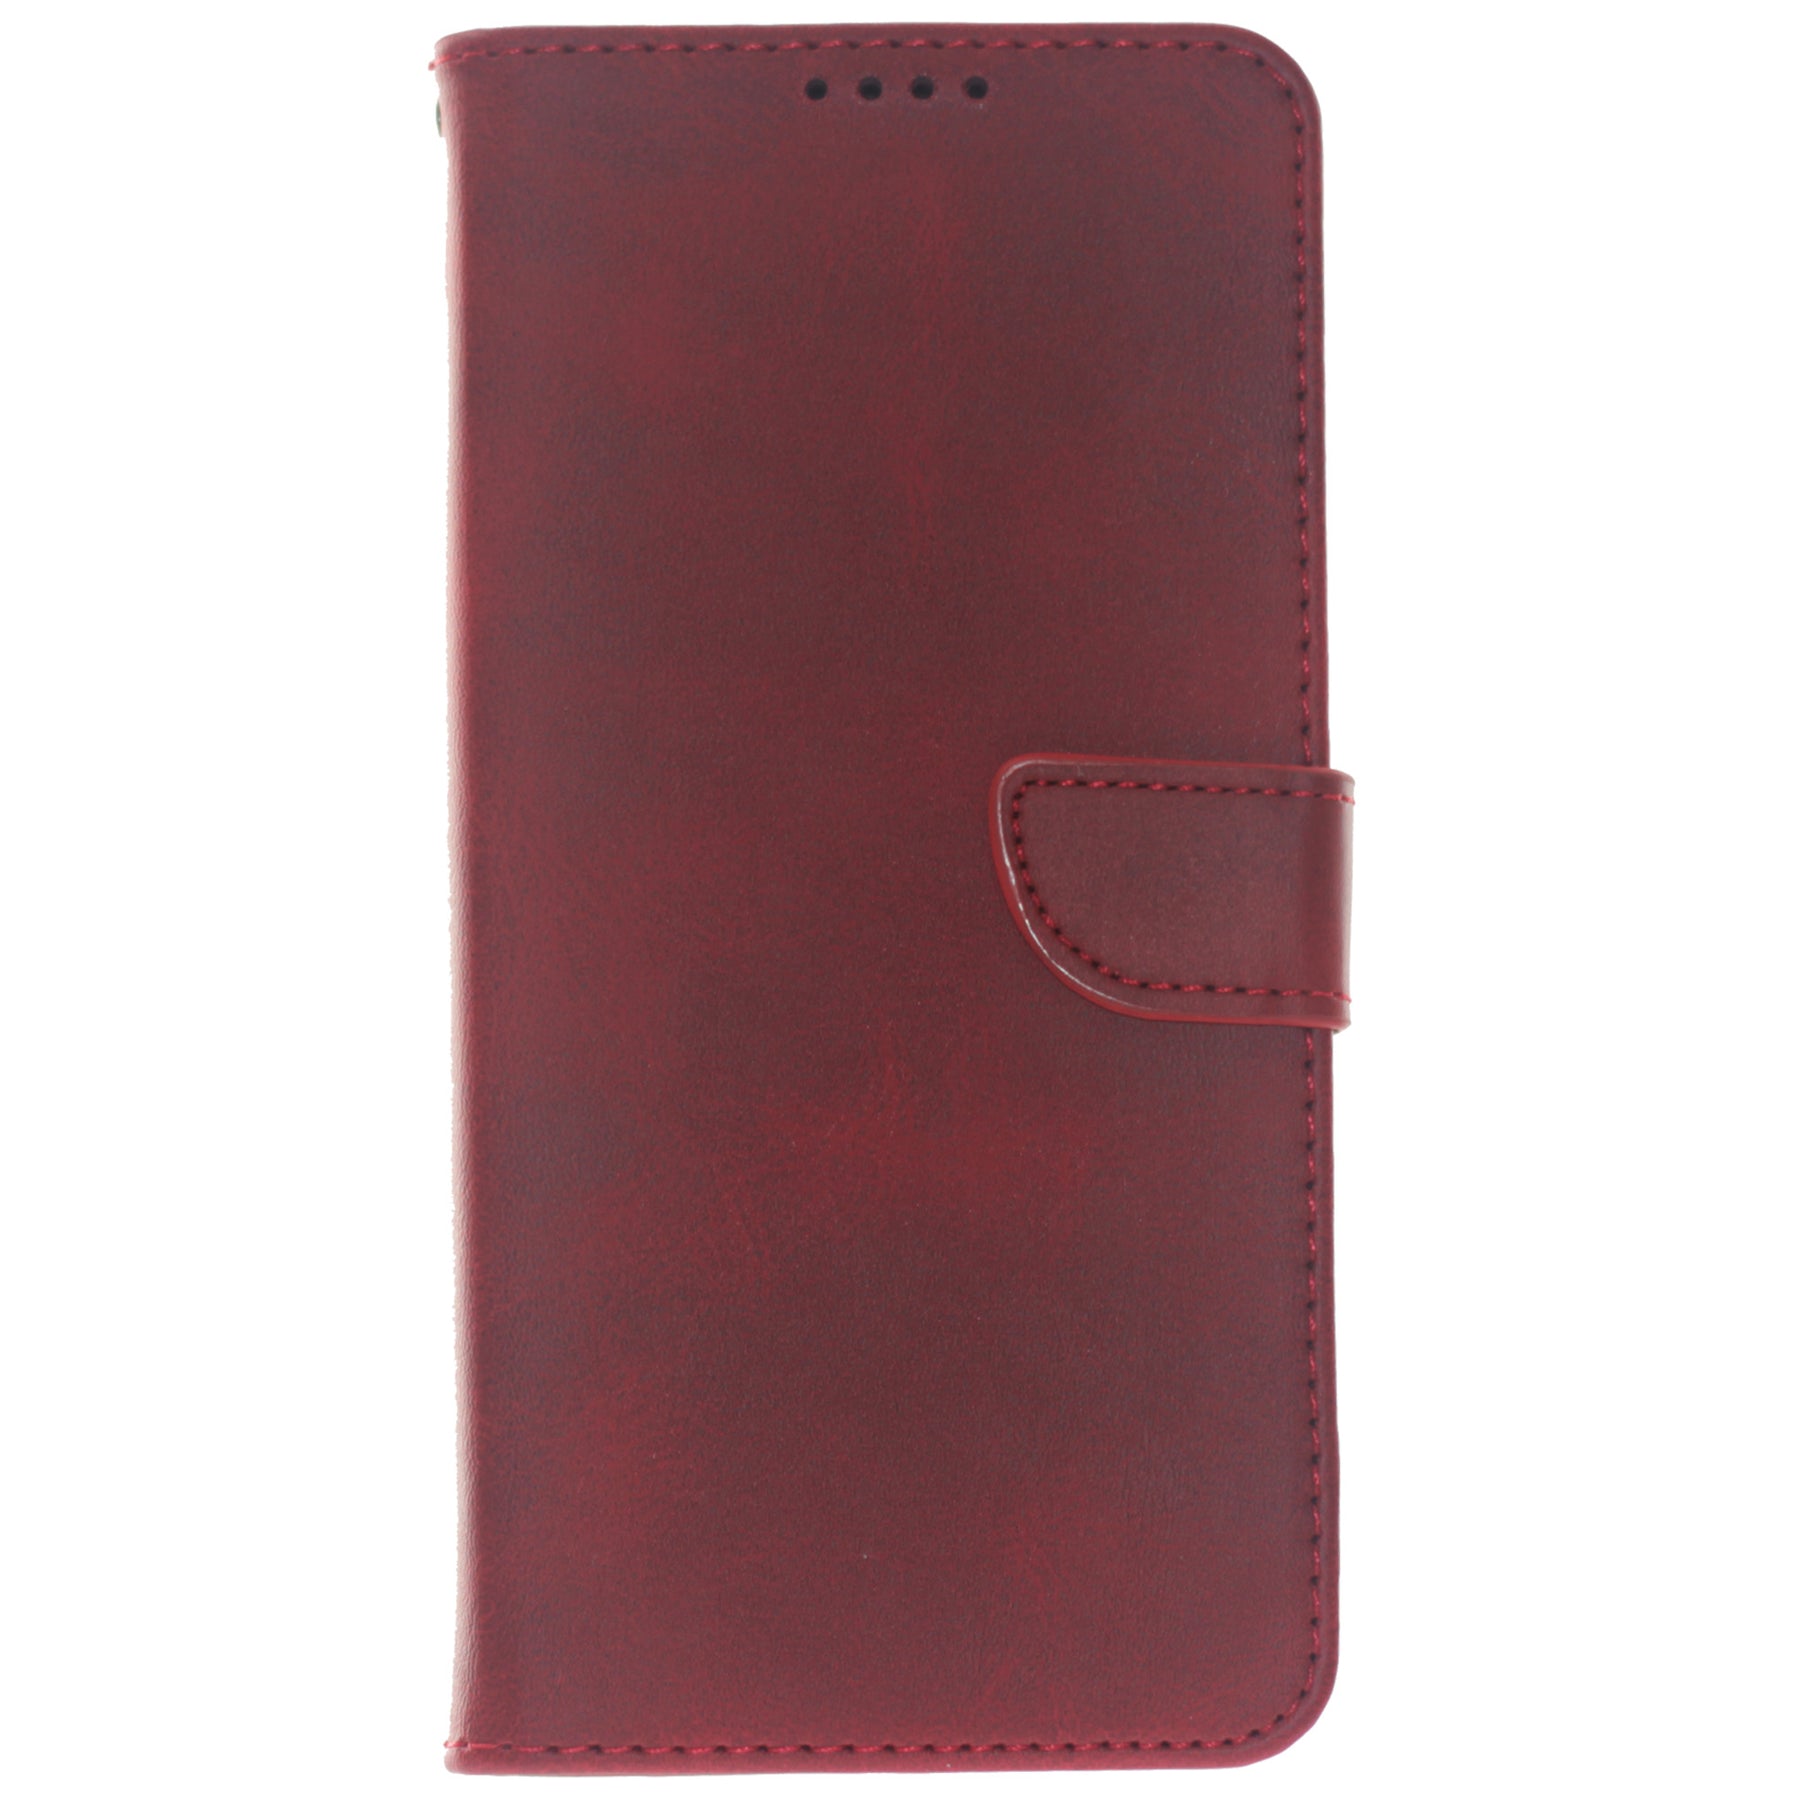 Nord CE 5G red wallet case